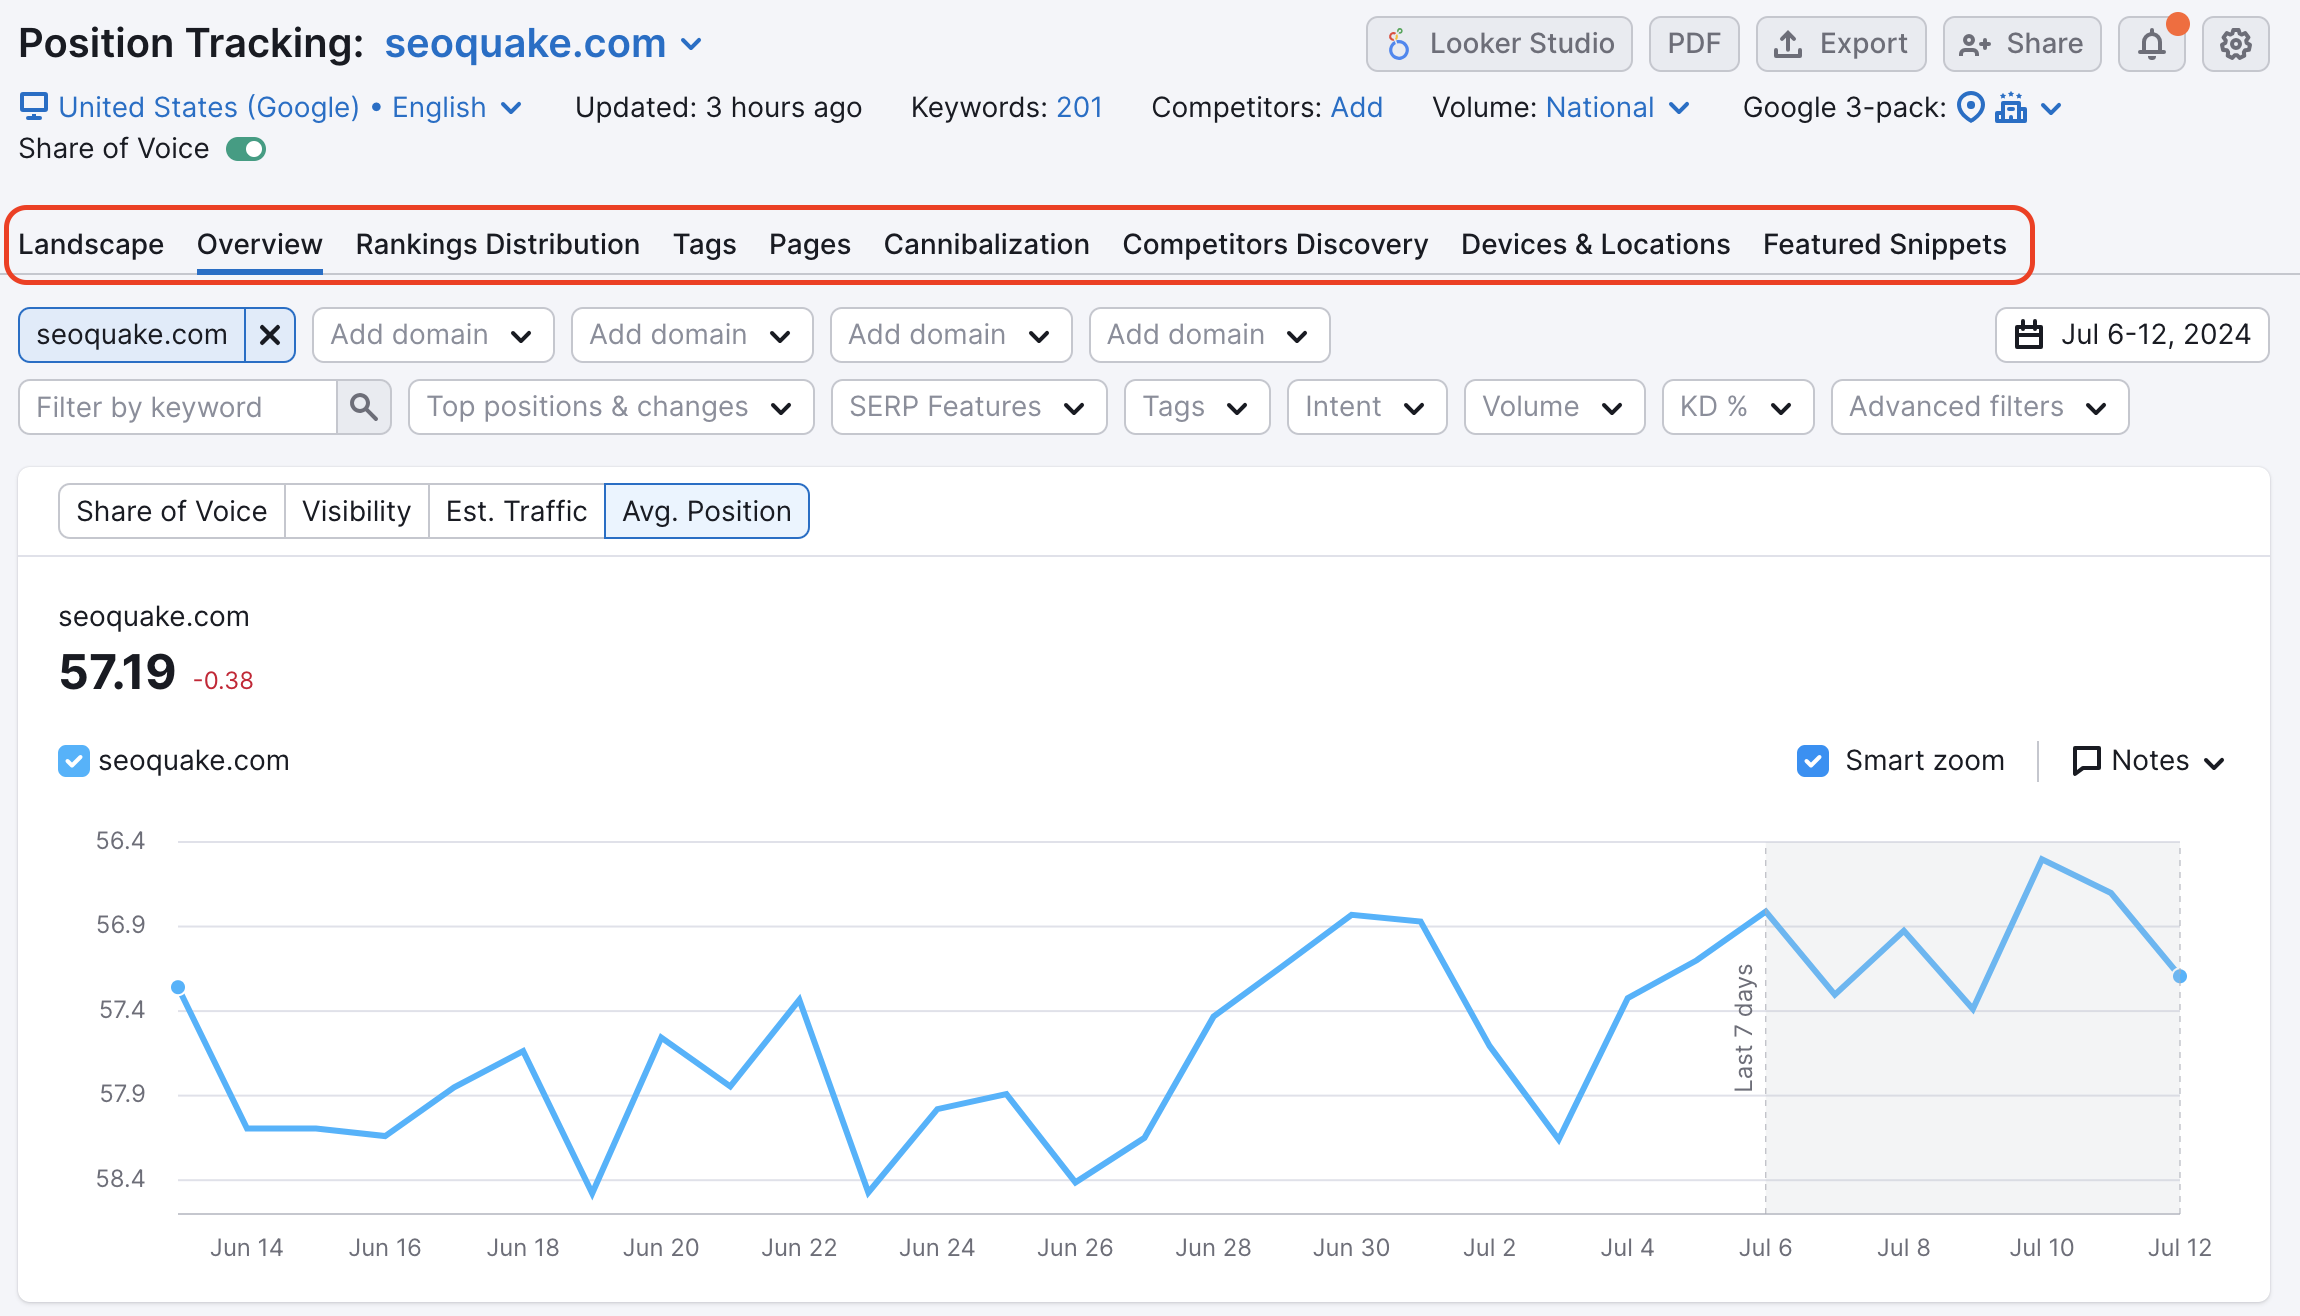 Position Tracking Overview report with all other report tabs being highlighted: Landscape, Overview, Rankings Distribution, Tags, Pages, Cannibalization, Competitors Discovery, Devices & Locations, and Featured Snippets.